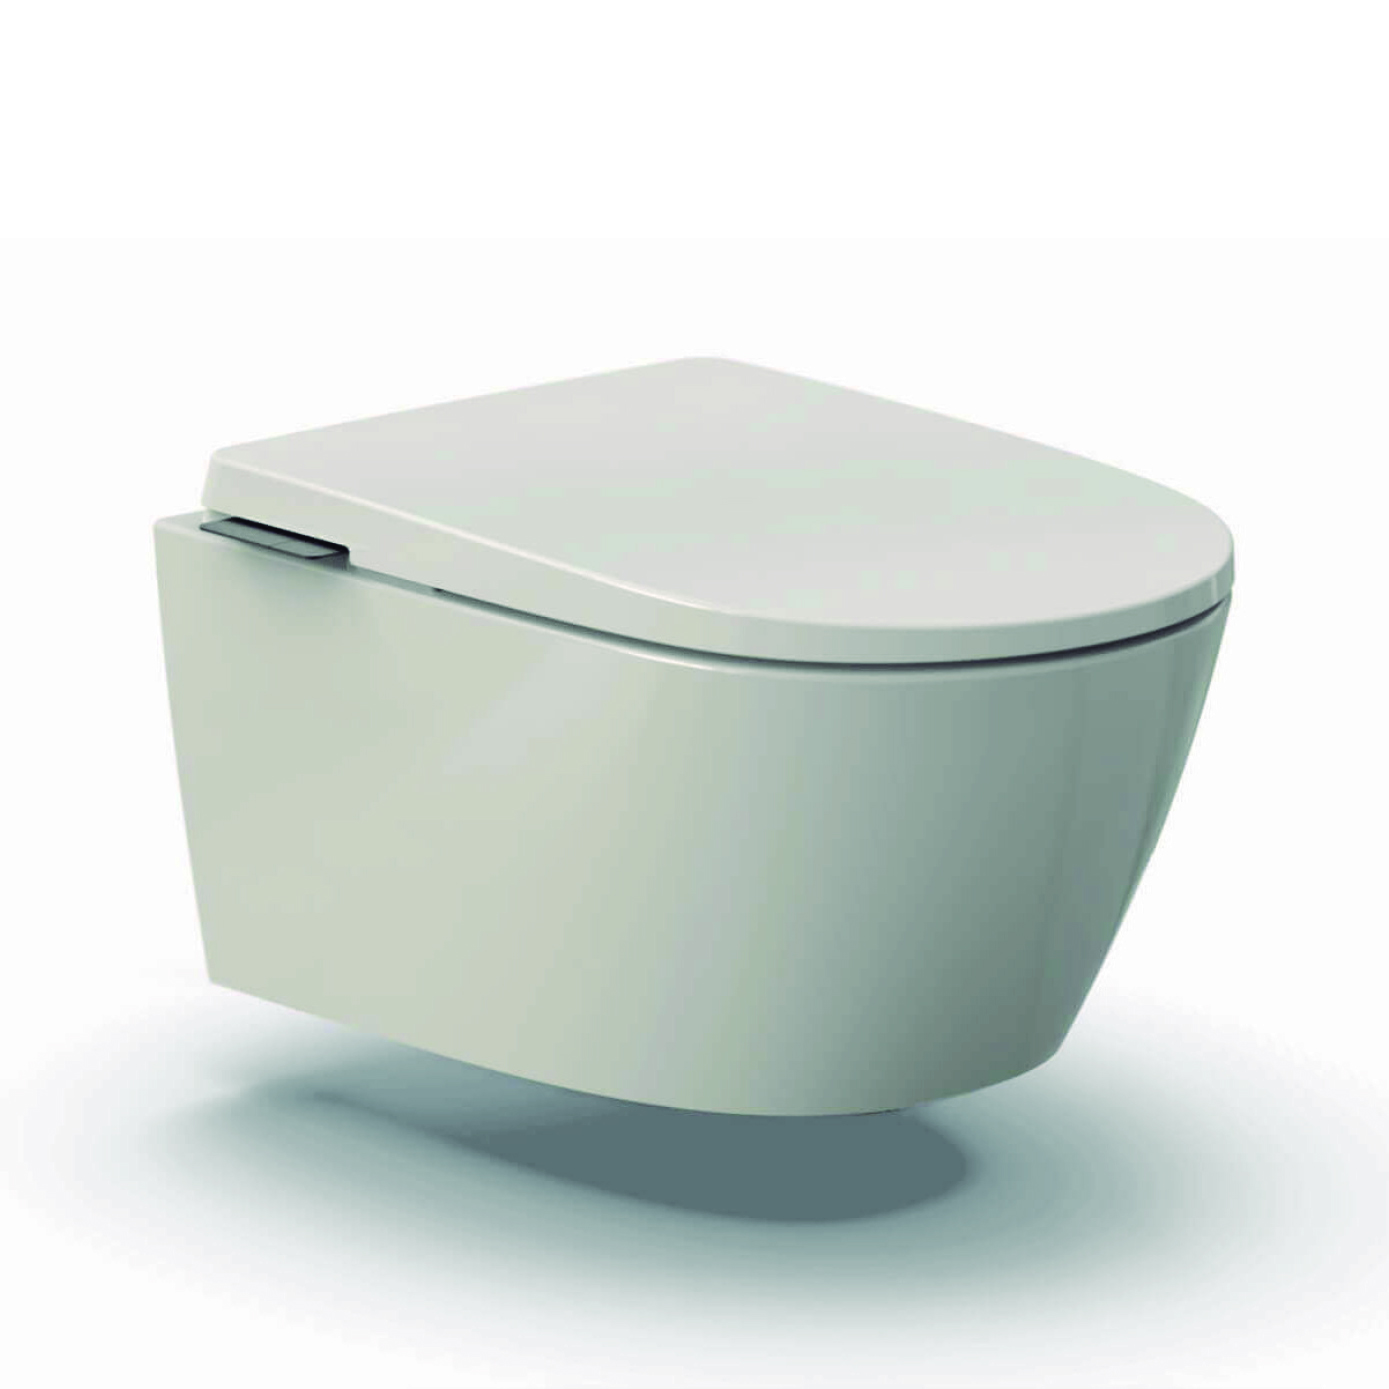 Hydro In-Tank® - WC, Roca Sanitario, S.A. / Co-innovation with SIAMP